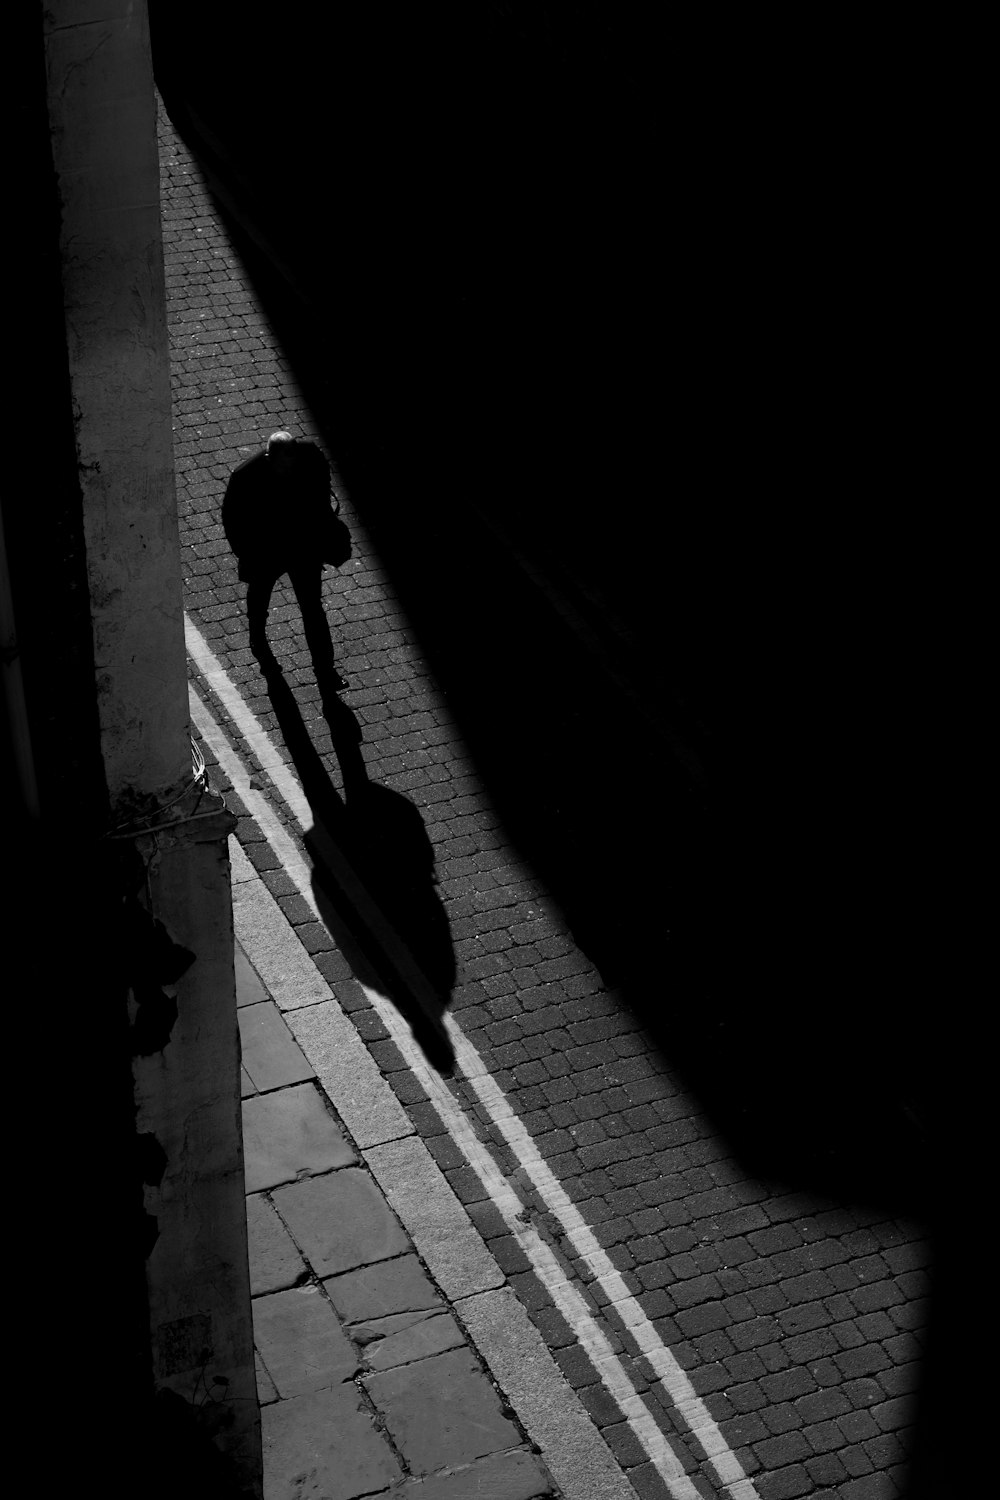 a shadow of a person walking down a street